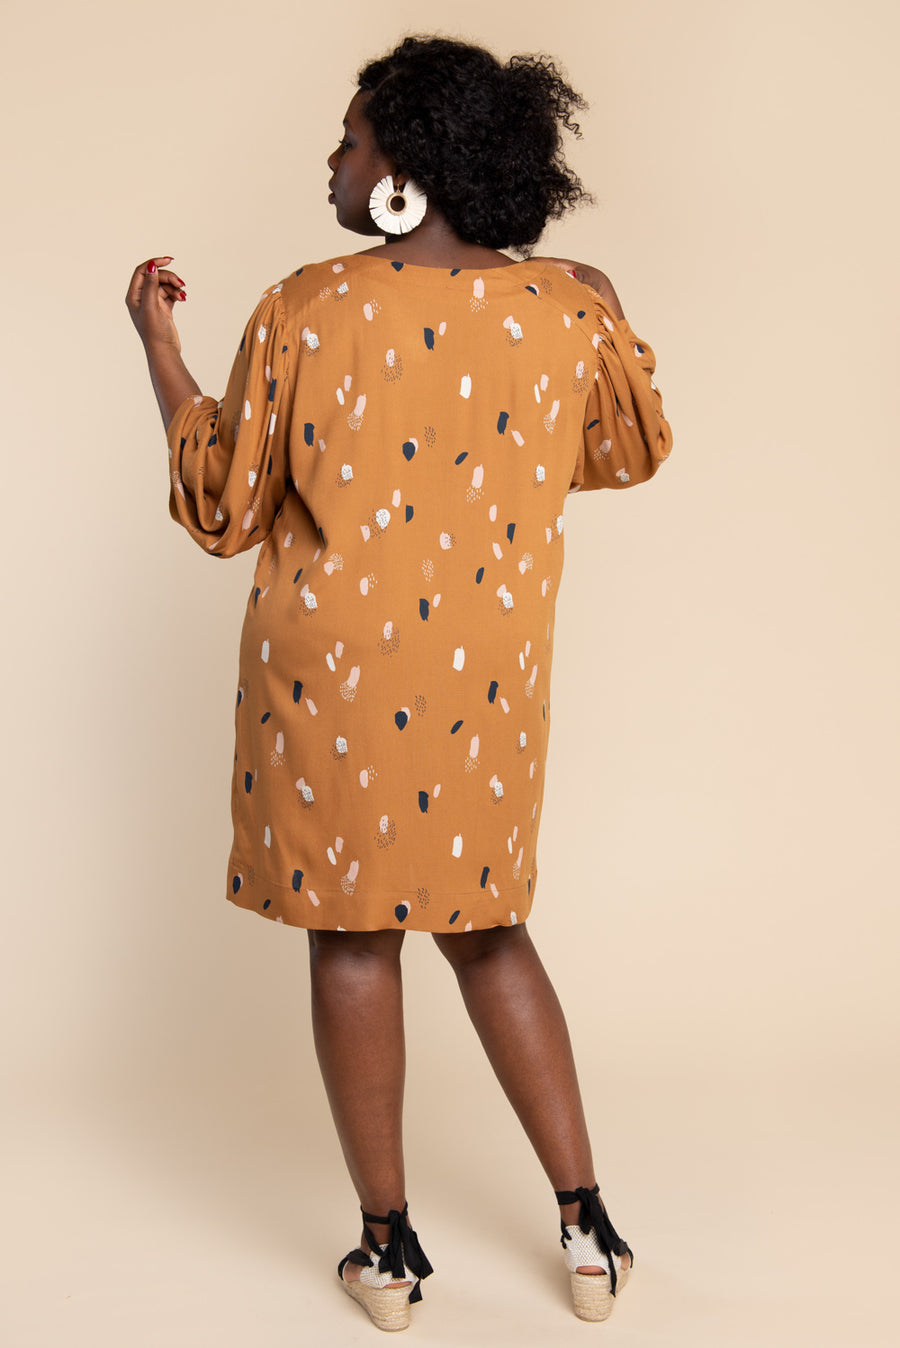 Cielo Top & Dress Sewing Pattern - Shift dress with gathered sleeves | Closet Core Patterns